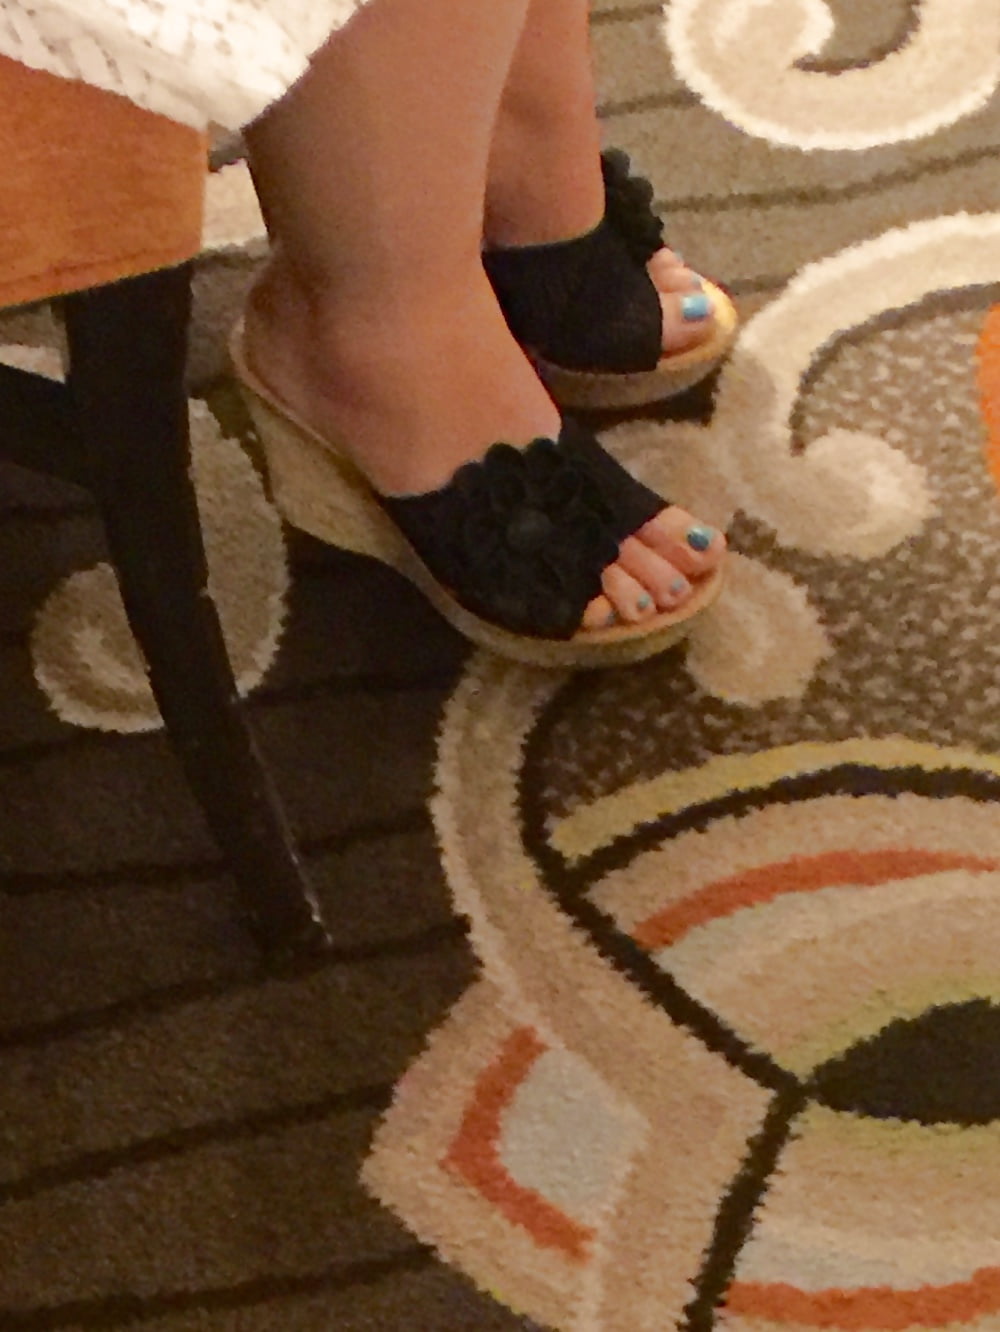 Sex Gallery Wife's sexy feet in wedges playing in Vegas